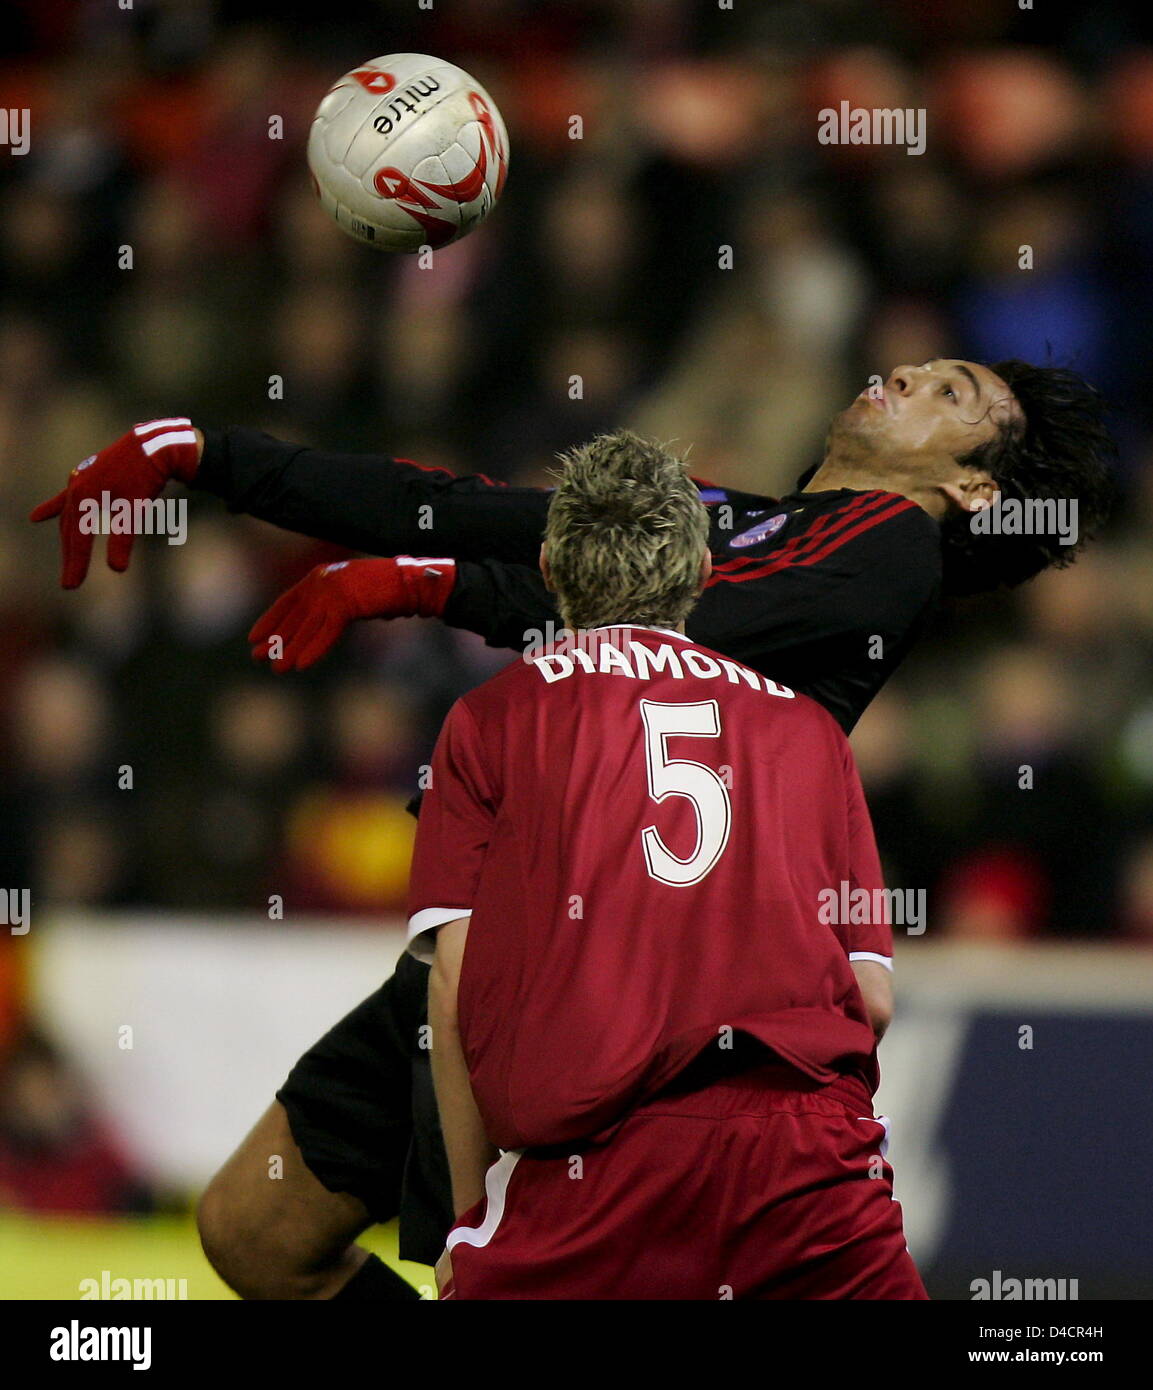 Bayern Munich's Luca Toni and Aberdeen's Zander Diamond are pictured in action during their UEFA Cup soccer match at Pittodrie stadium, Aberdeen, Scottland, 14 February 2008. Photo: MATTHIAS SCHRADER Stock Photo